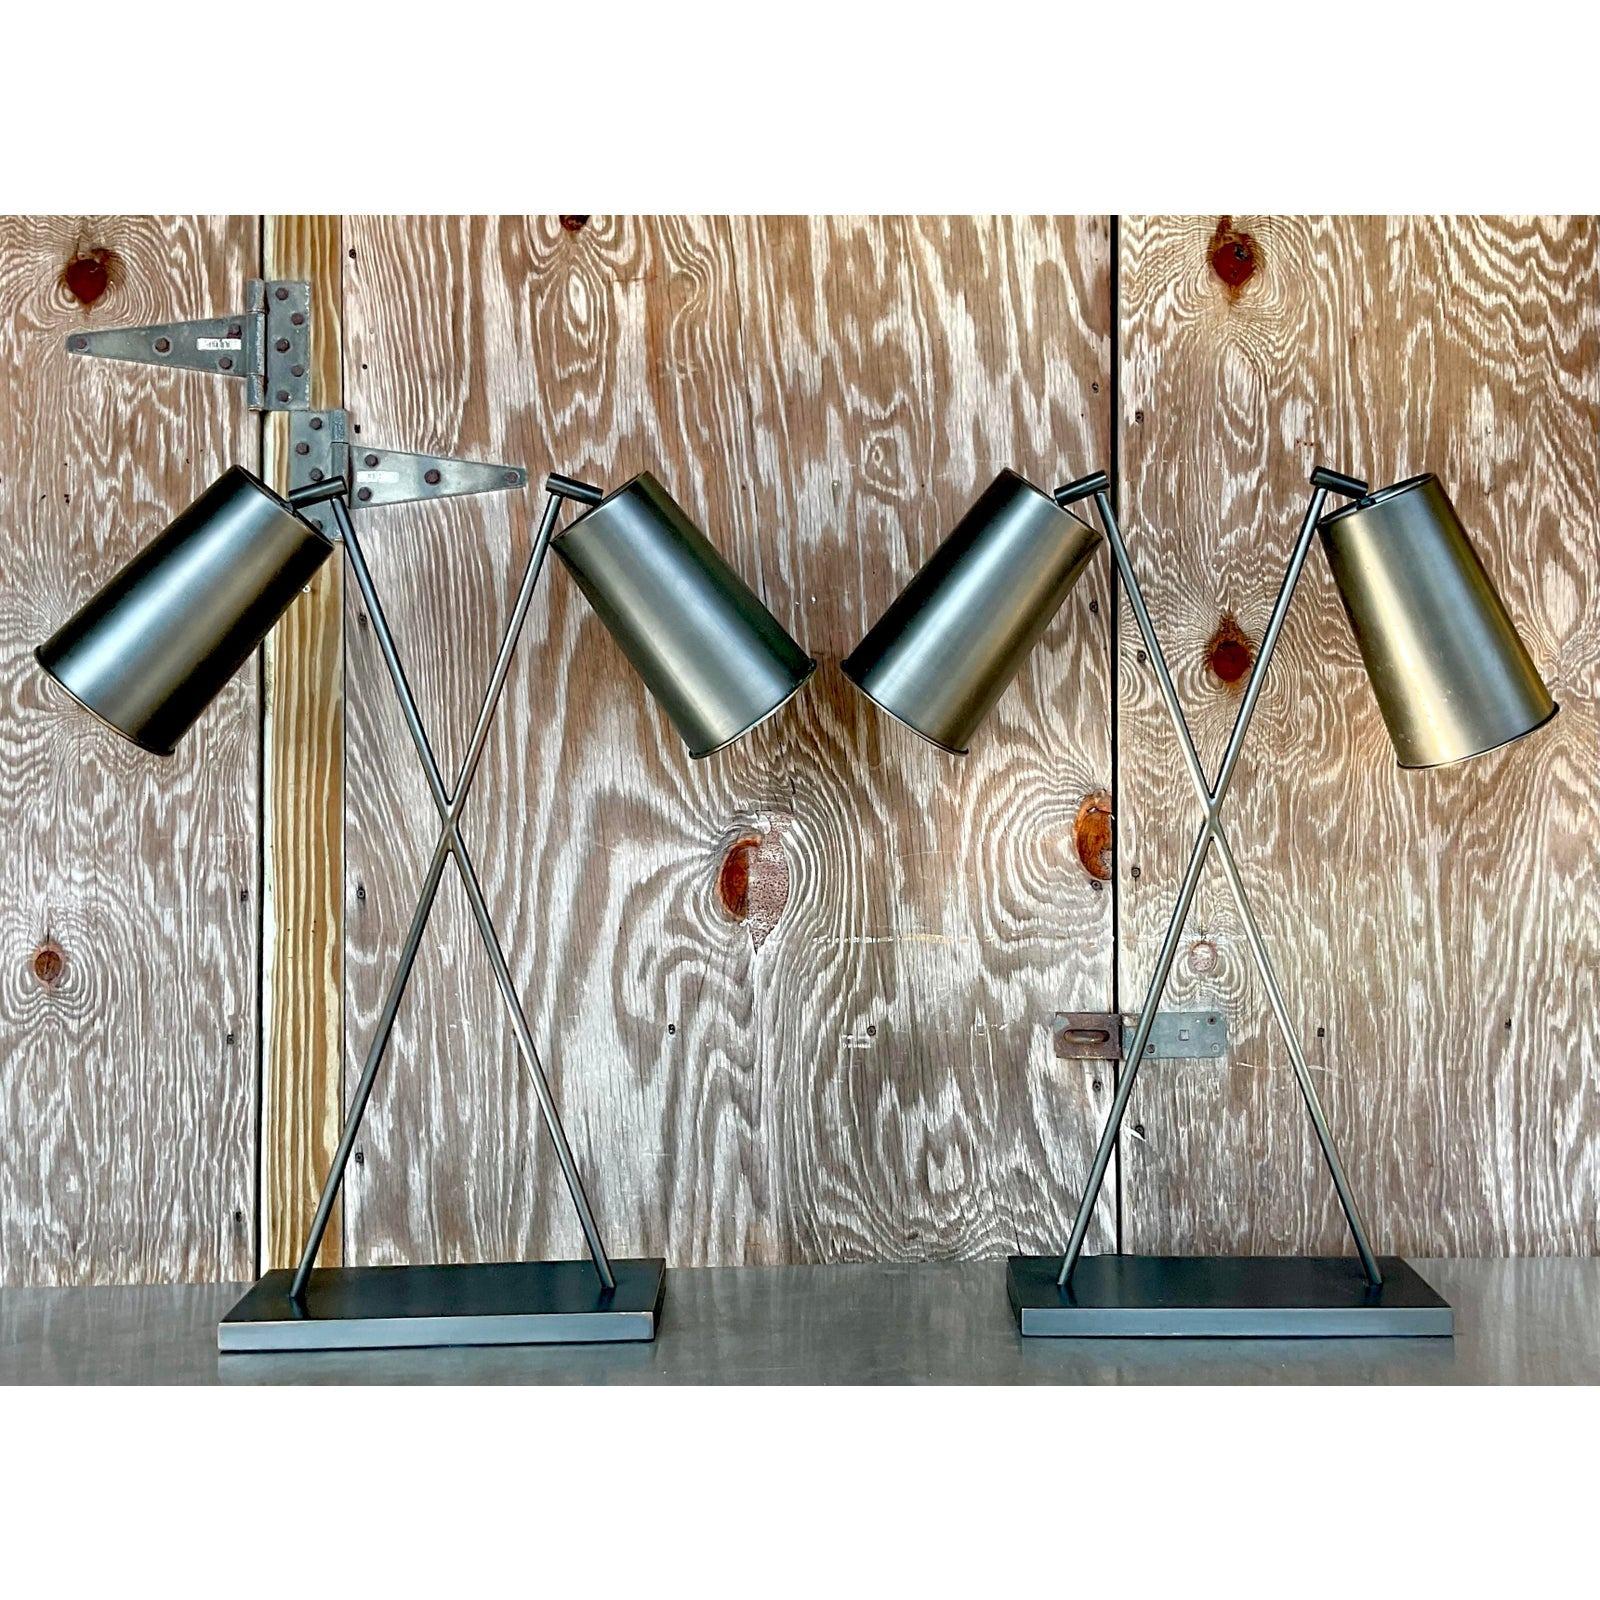 Contemporary Boho Arteriors “Marley” Lamps - a Pair For Sale